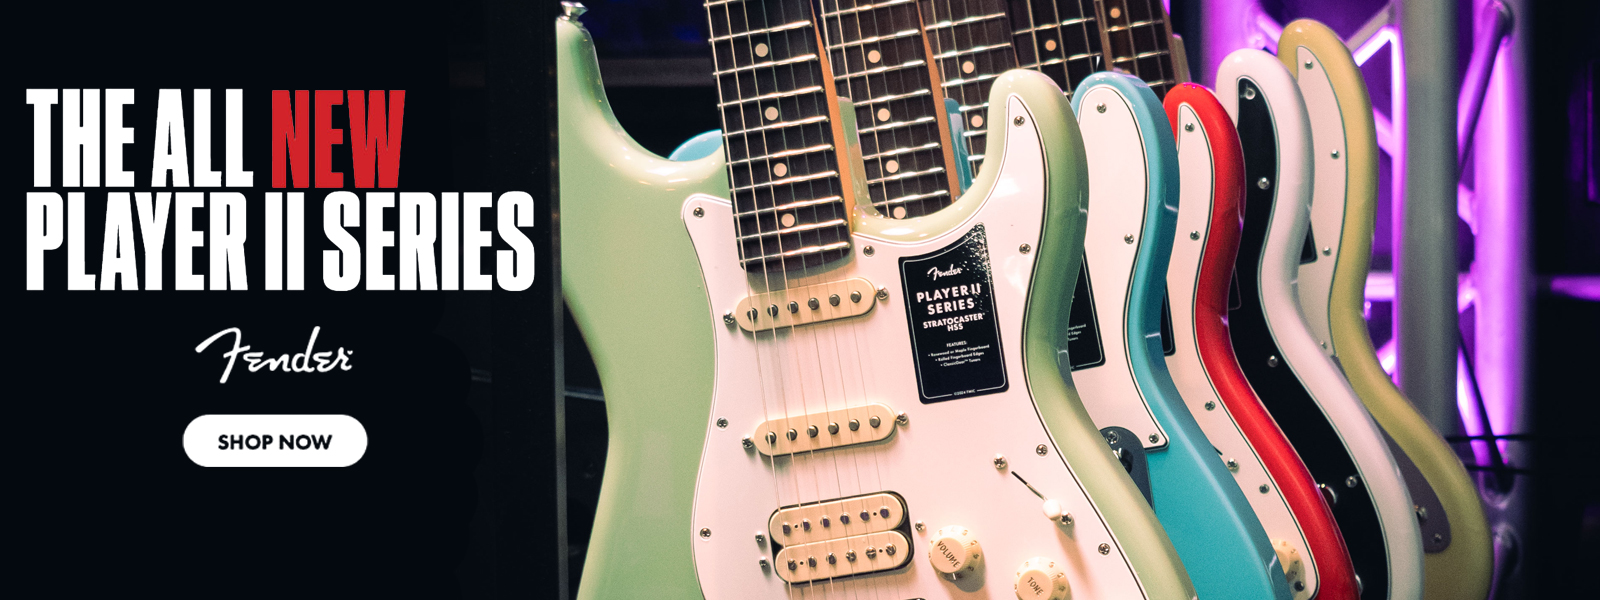 Fender Player II Series Now Available